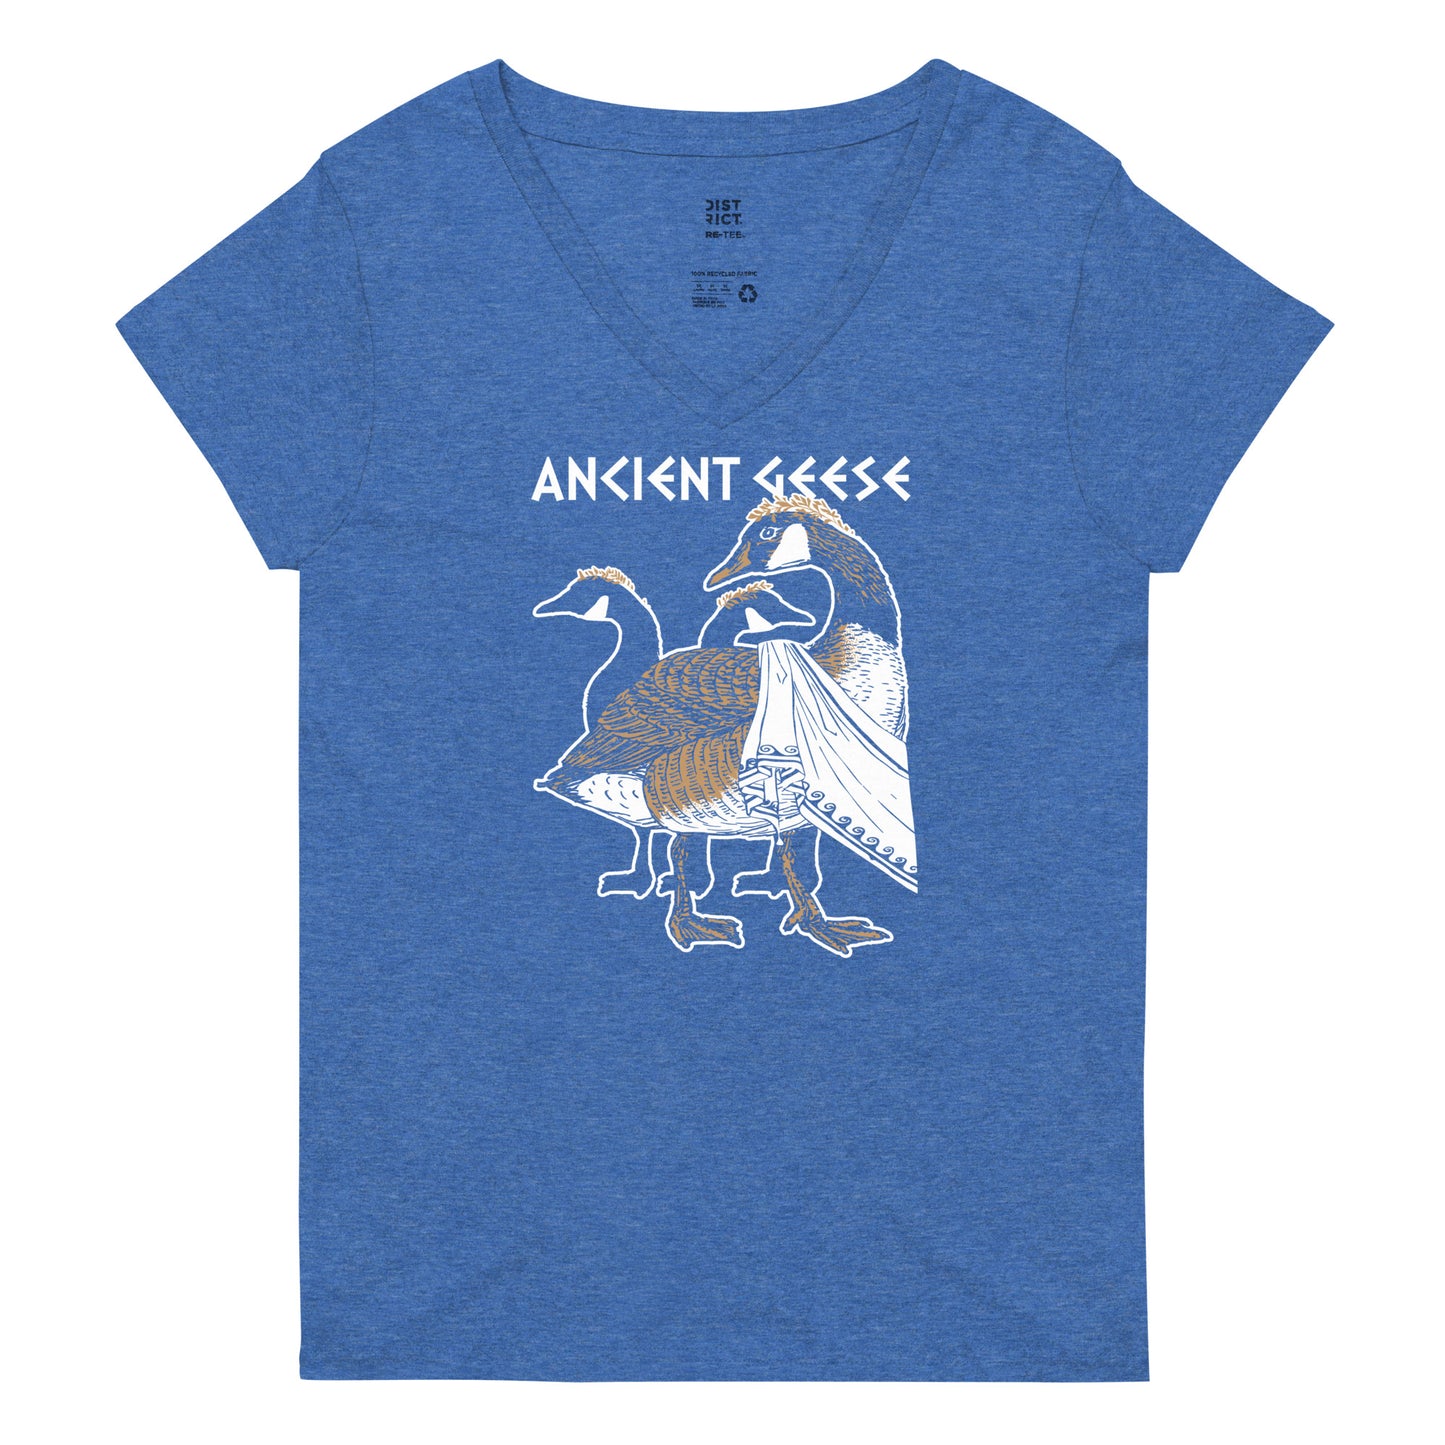 Ancient Geese Women's V-Neck Tee